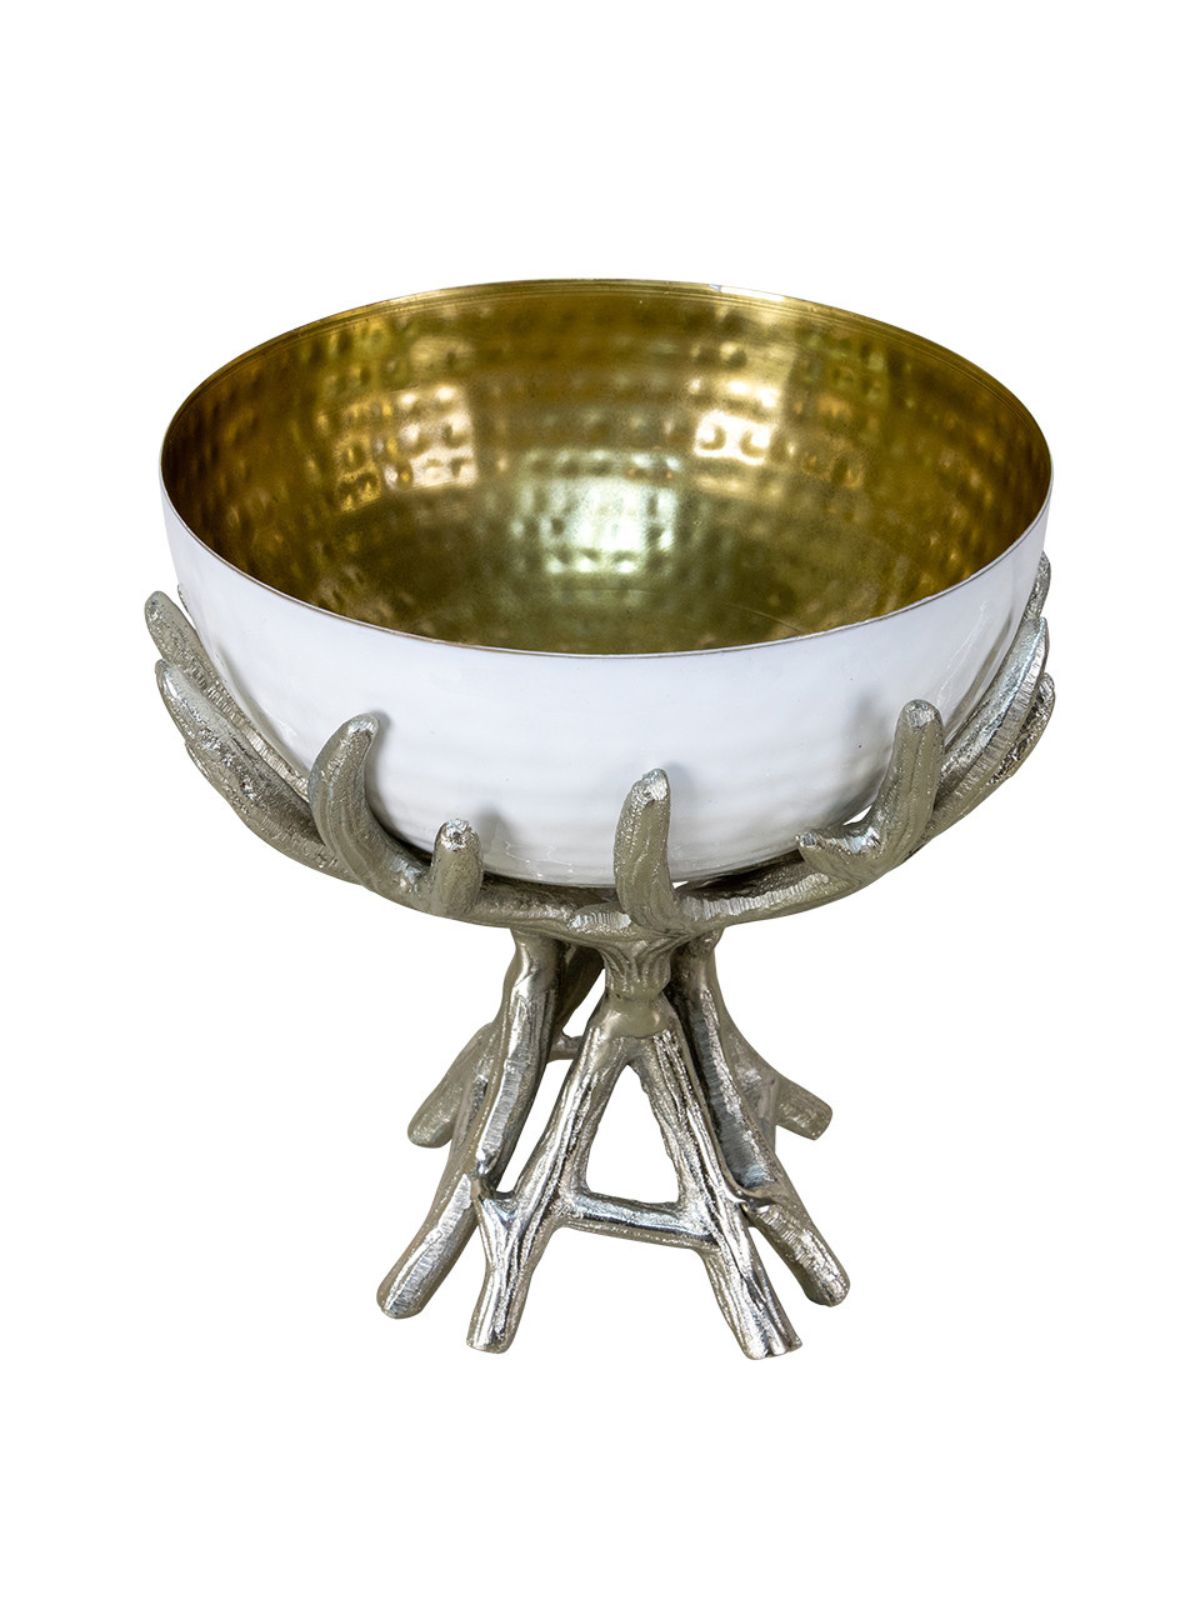 9.5D x 9H decorative white bowl with gold interior sitting on a silver branch stand.